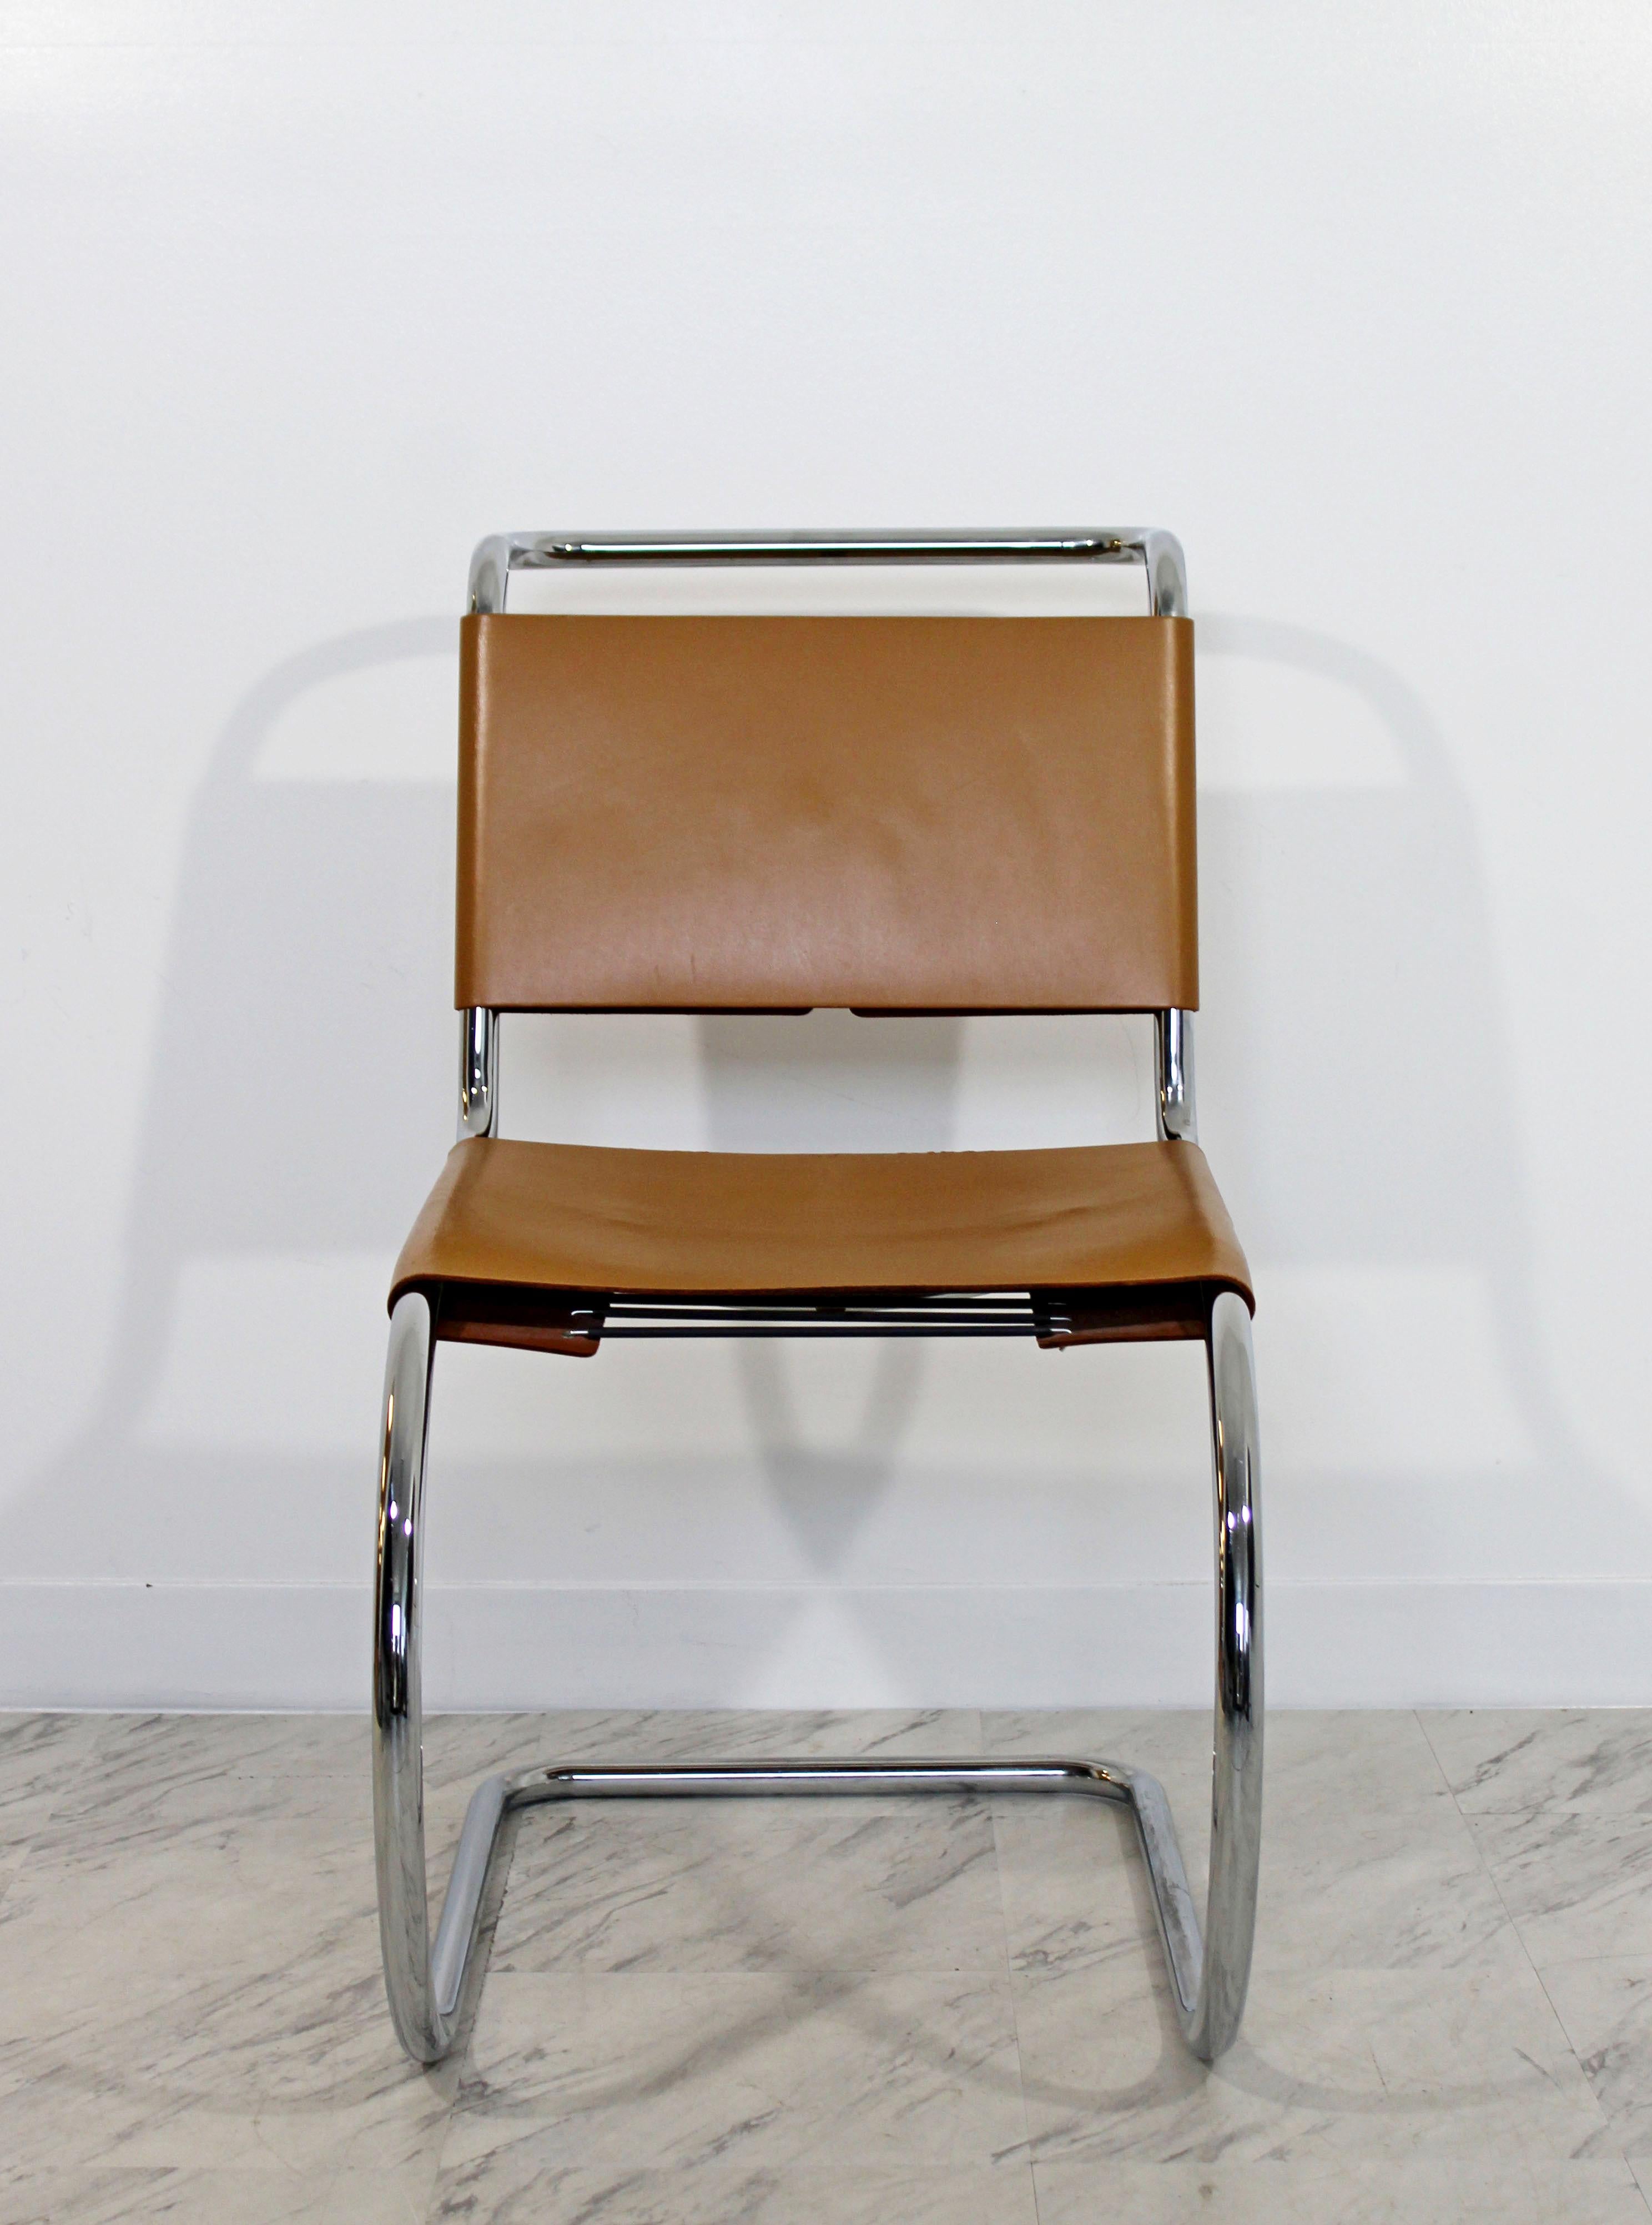 For your consideration is a marvelous, original MR side chair, made of chrome and cognac leather, by Mies Van der Rohe for Knoll, made in Italy, circa 1970. In excellent condition. The dimensions are 18